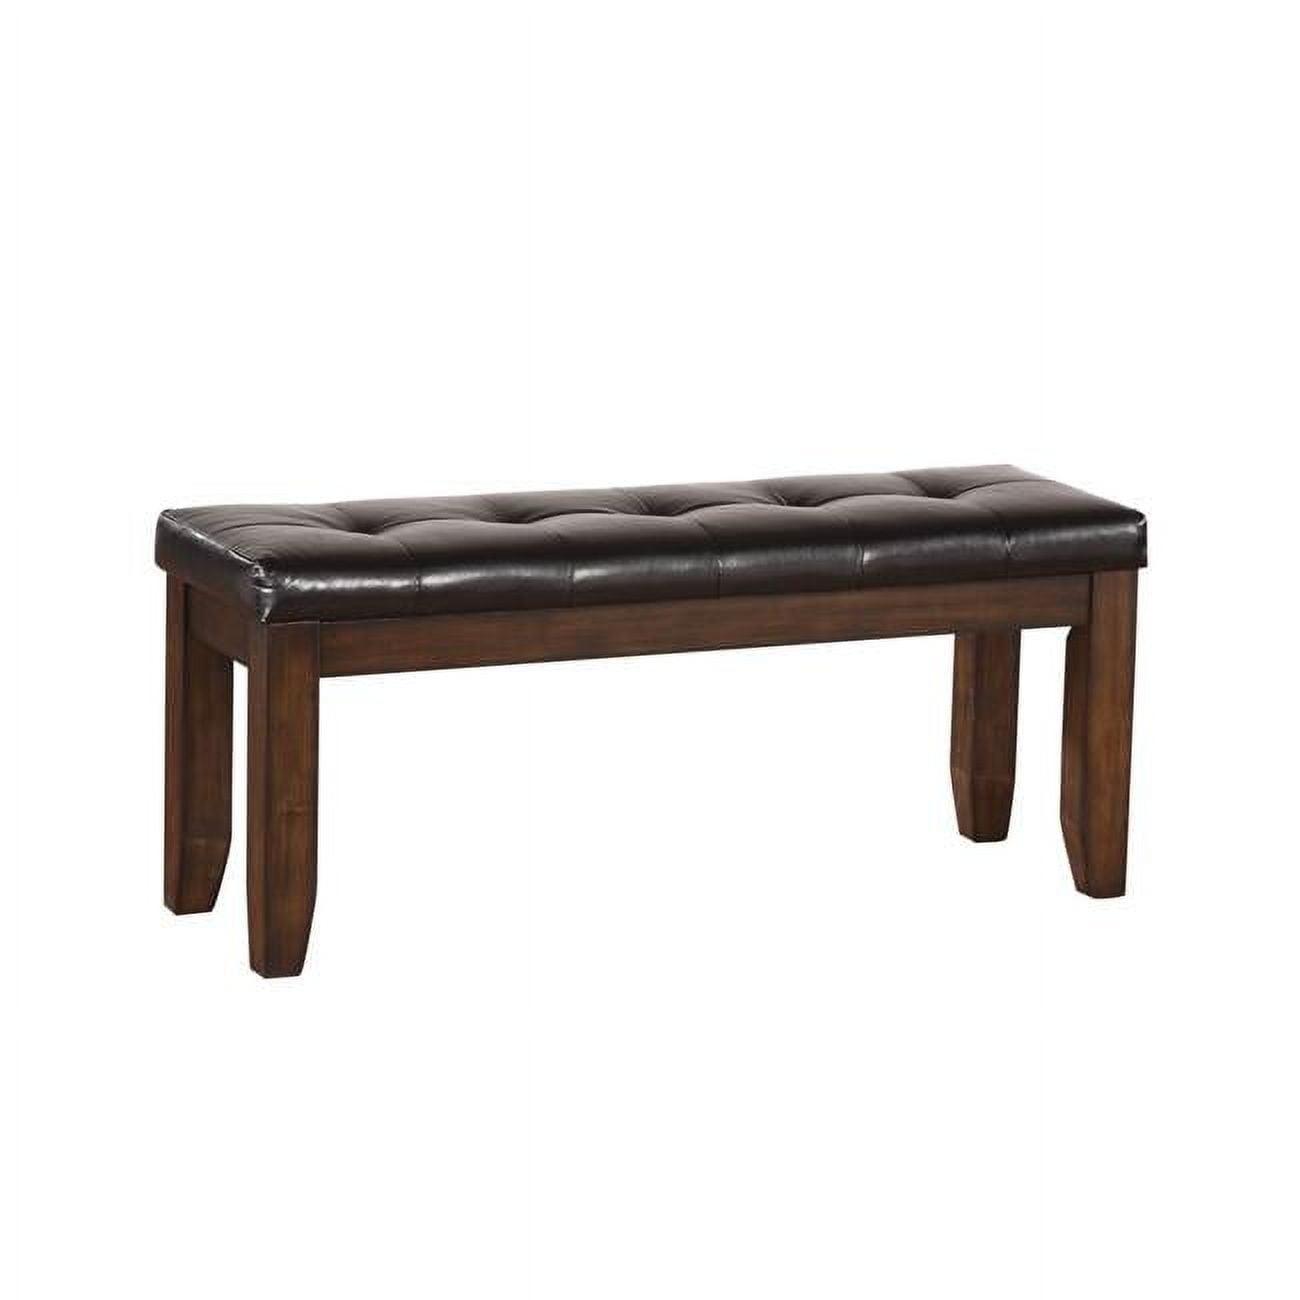 Brown Leatherette Tufted Wooden Bench with Chamfered Legs, 48"